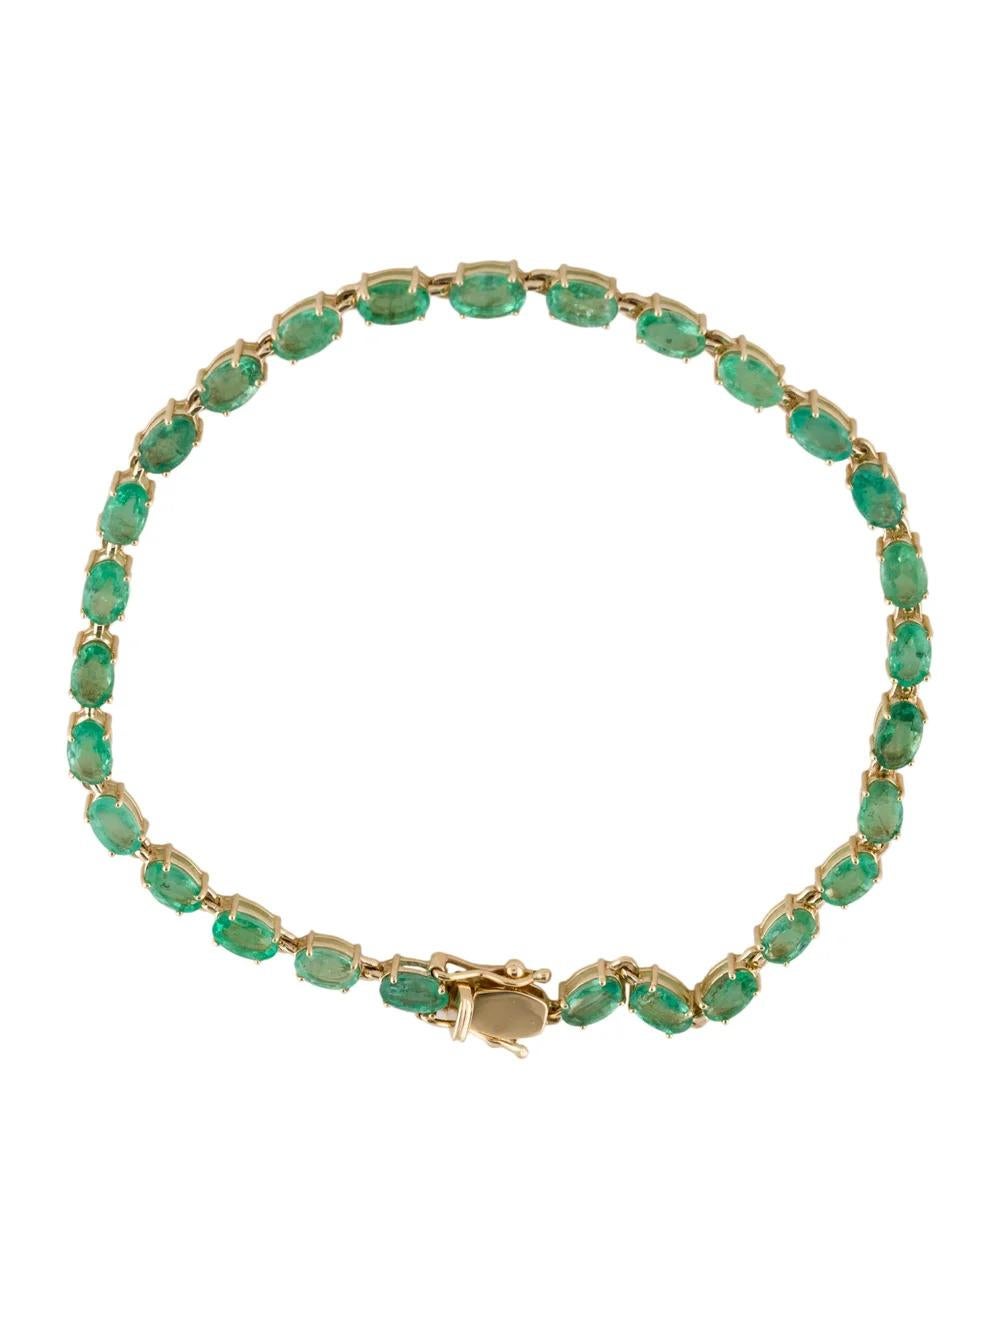 14K 6.30ctw Emerald Link Bracelet - Stunning Yellow Gold Design, Statement Piece In New Condition For Sale In Holtsville, NY